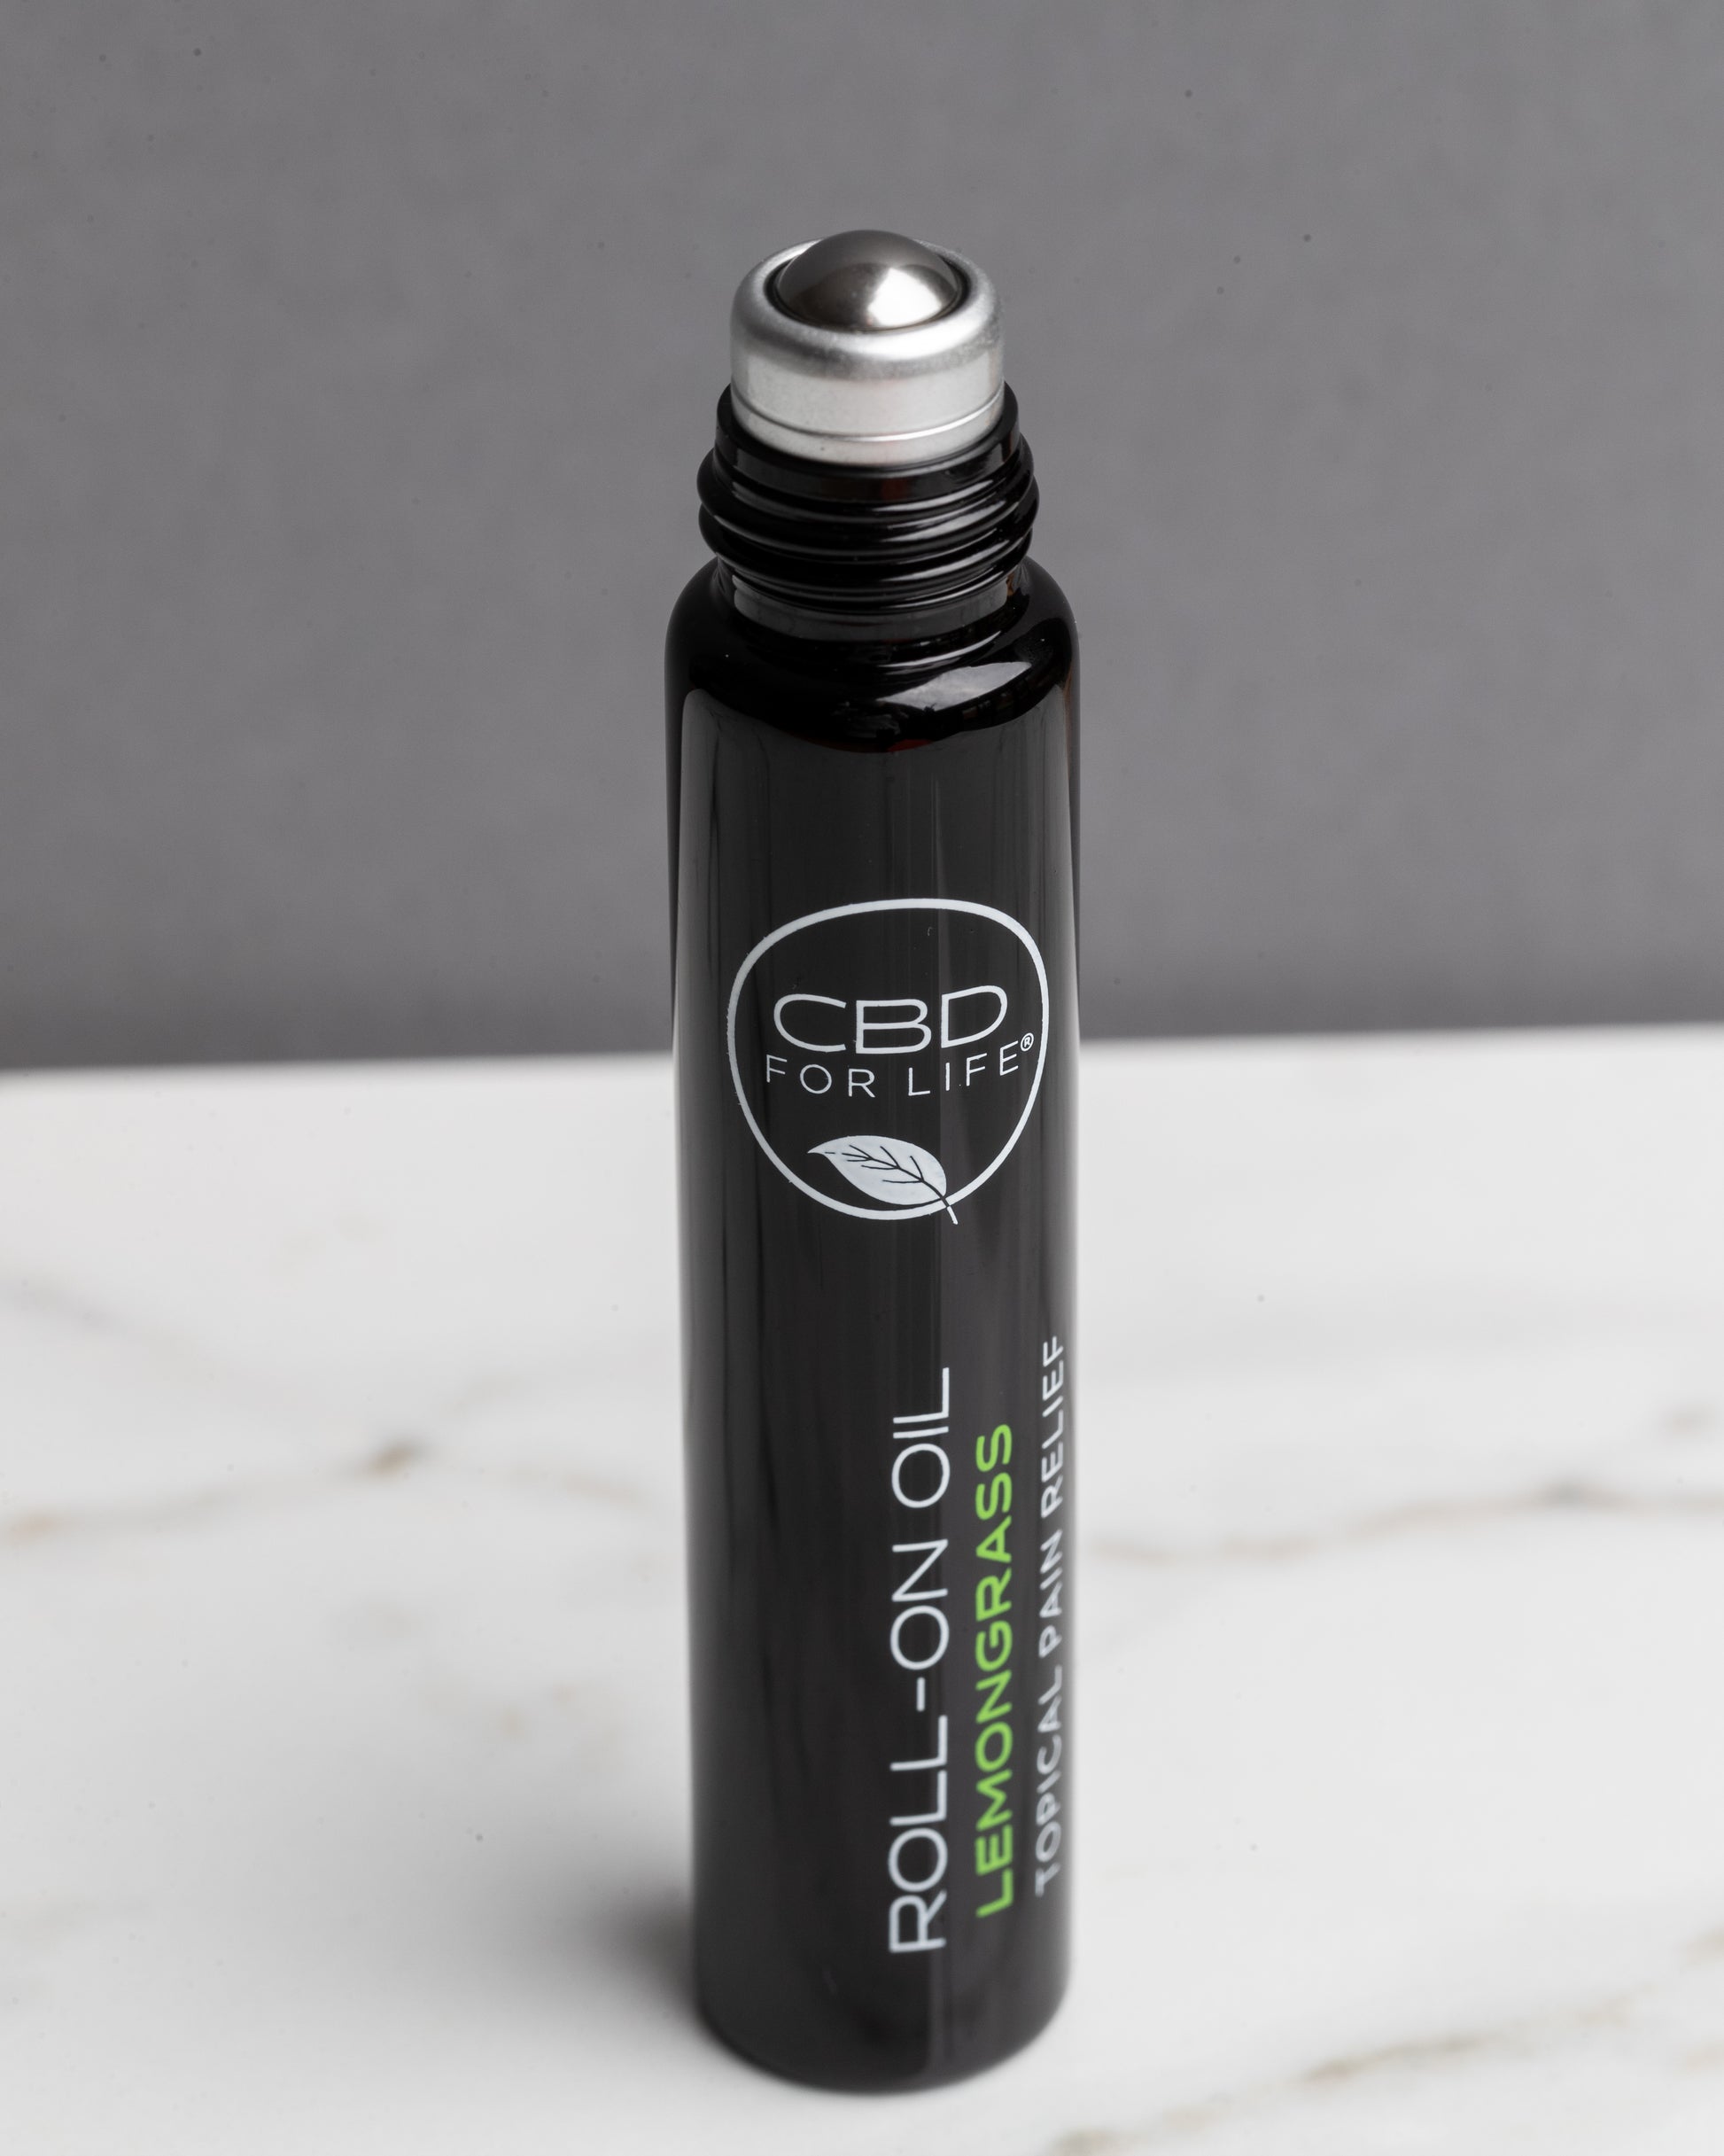 Pure CBD Roll On Oil - Topical pain relief for everyday use on sore or achey muscles.